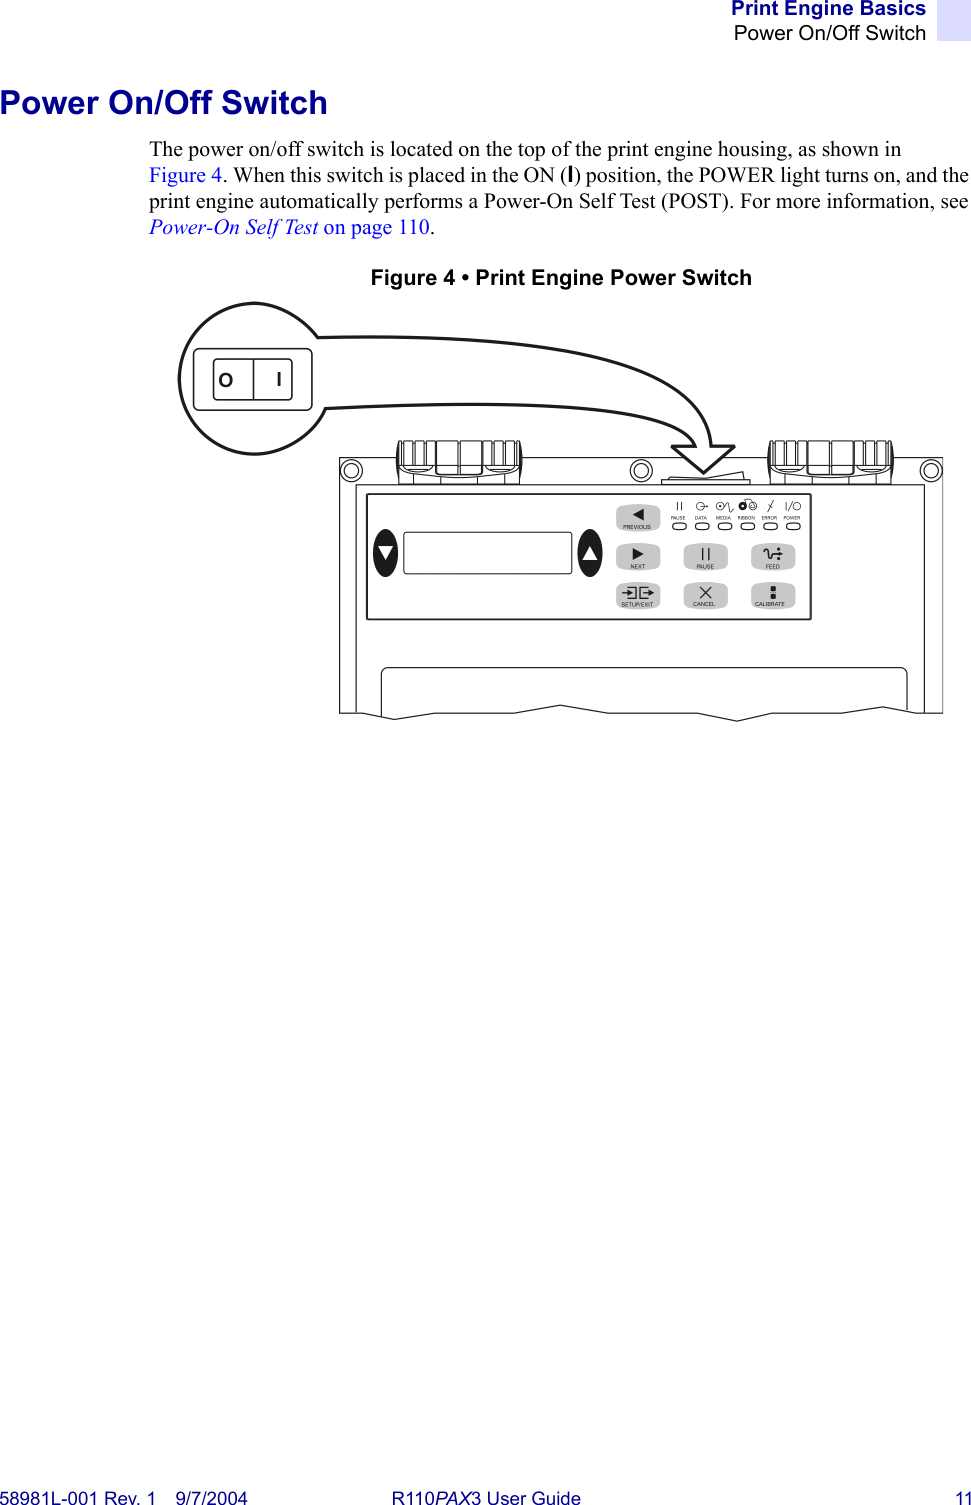 Print Engine BasicsPower On/Off Switch58981L-001 Rev. 1 9/7/2004 R110PAX3 User Guide 11Power On/Off SwitchThe power on/off switch is located on the top of the print engine housing, as shown in Figure 4. When this switch is placed in the ON (I) position, the POWER light turns on, and the print engine automatically performs a Power-On Self Test (POST). For more information, see Power-On Self Test on page 110.Figure 4 • Print Engine Power Switch